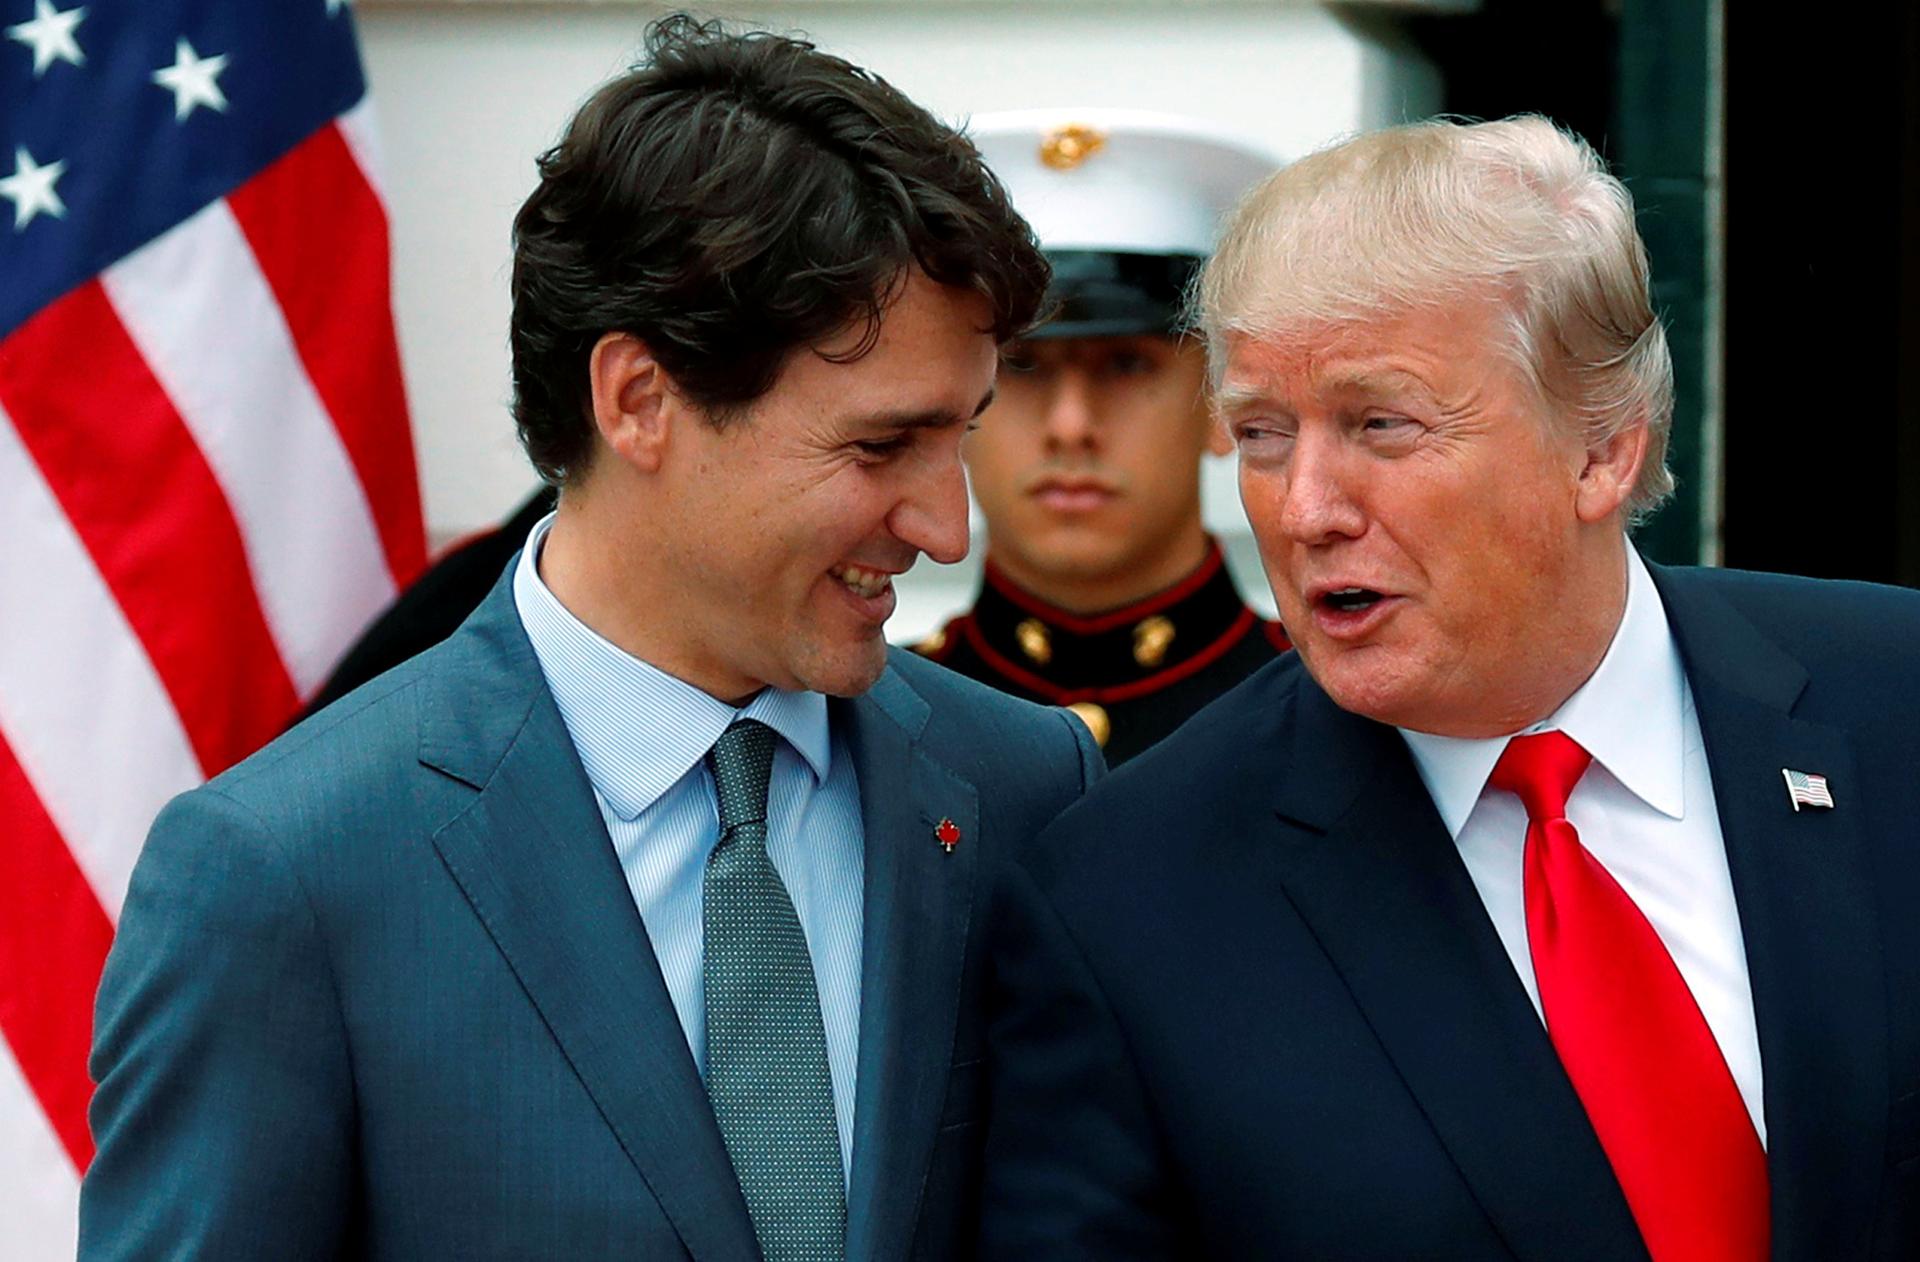 US President Donald Trump welcomes Canadian Prime Minister Justin Trudeau at the White House in Washington, DC, on Oct. 11, 2017.